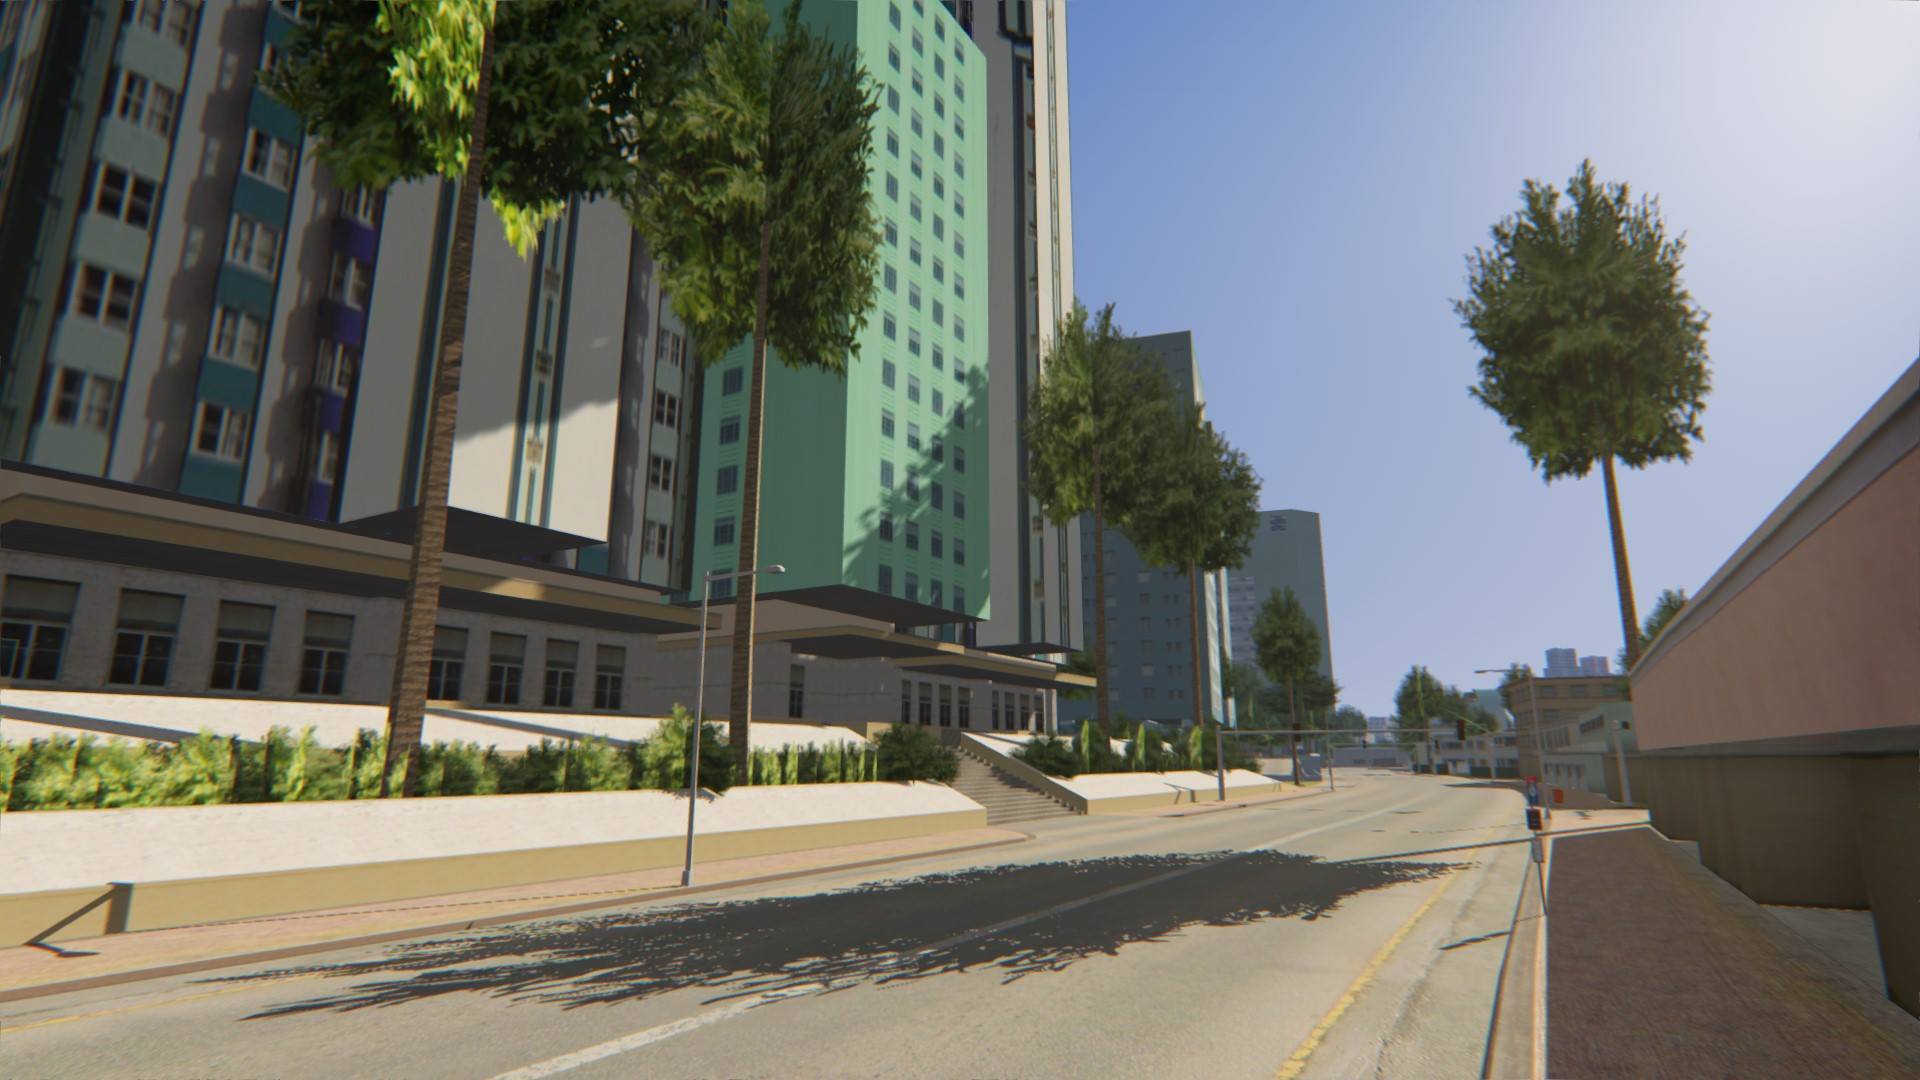 GTA V MAP FREE for ASSETTO CORSA